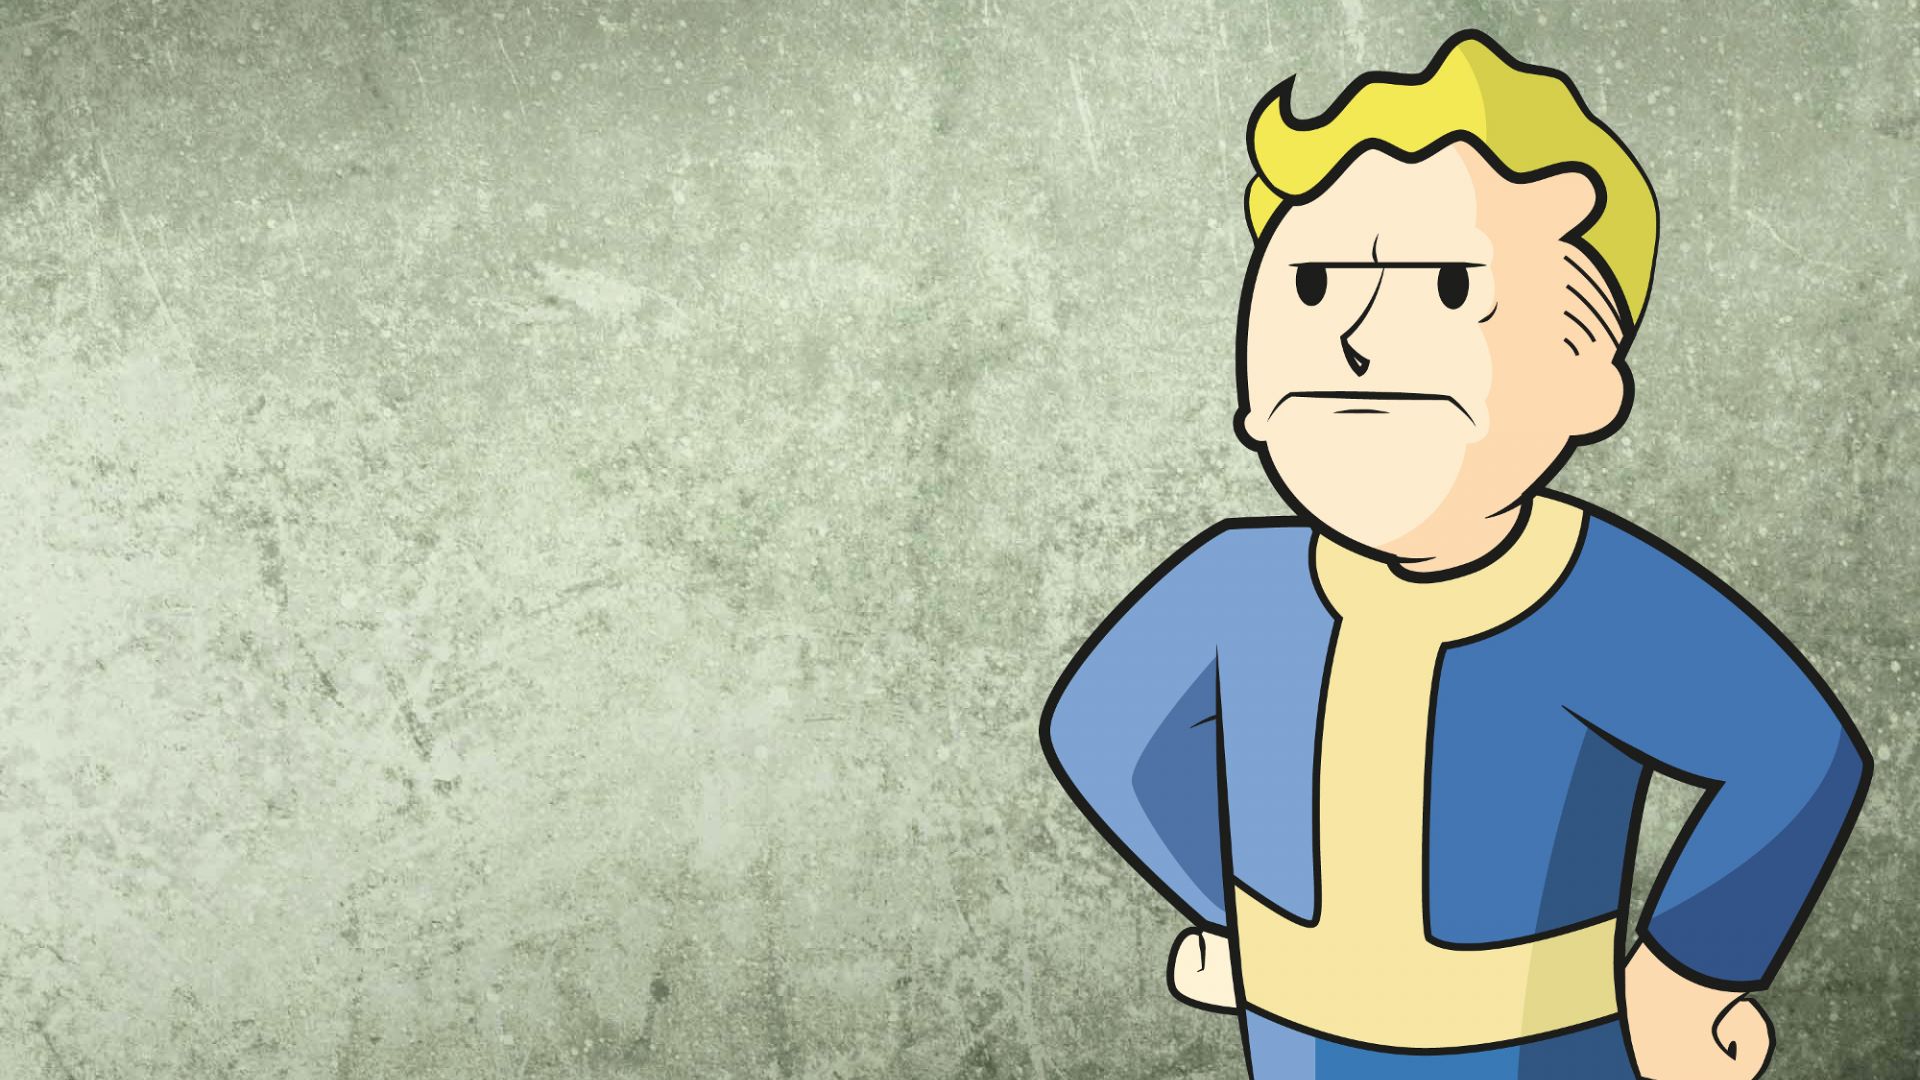 Wallpaper Fallout, angry, vault boy, video game